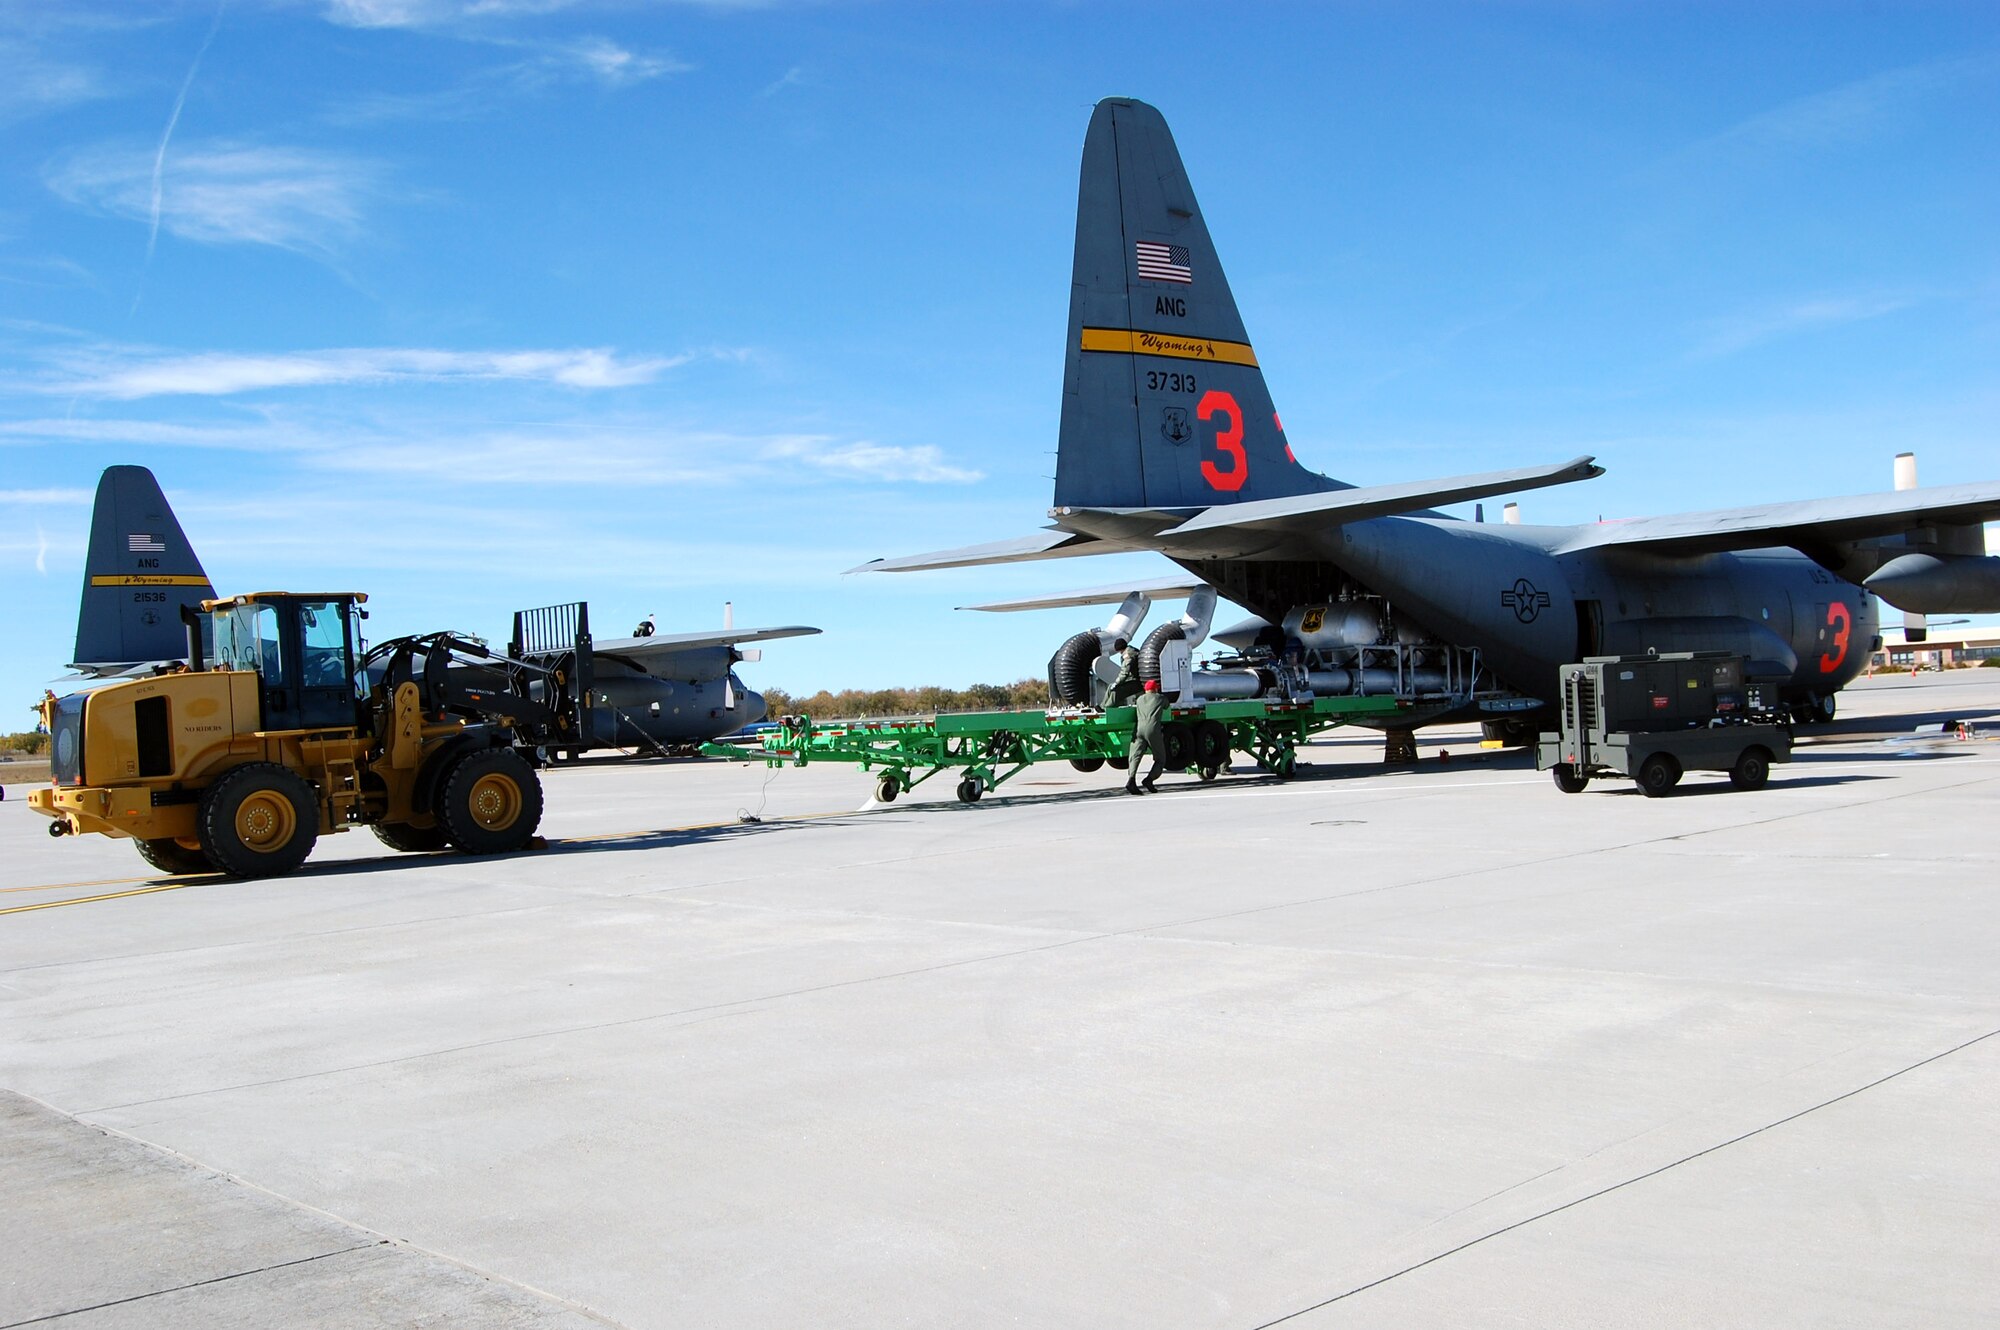 Airmen from the Wyoming Air National Guard load the Modular Airborne Fire Fighting System onto a Wyoming Air National Guard C-130 Hercules Oct. 23 in Cheyenne, Wyo. The C-130 is being deployed to California to assist with firefighting efforts. Fires have ravaged Southern California forcing more than 500,000 people from their homes as the president has declared a federal emergency for seven counties in the state. The orange number on the tail identifies the plane as one of the units using the Modular Airborne Fire Fighting System to battle the blaze. (U.S. Army photo) 
